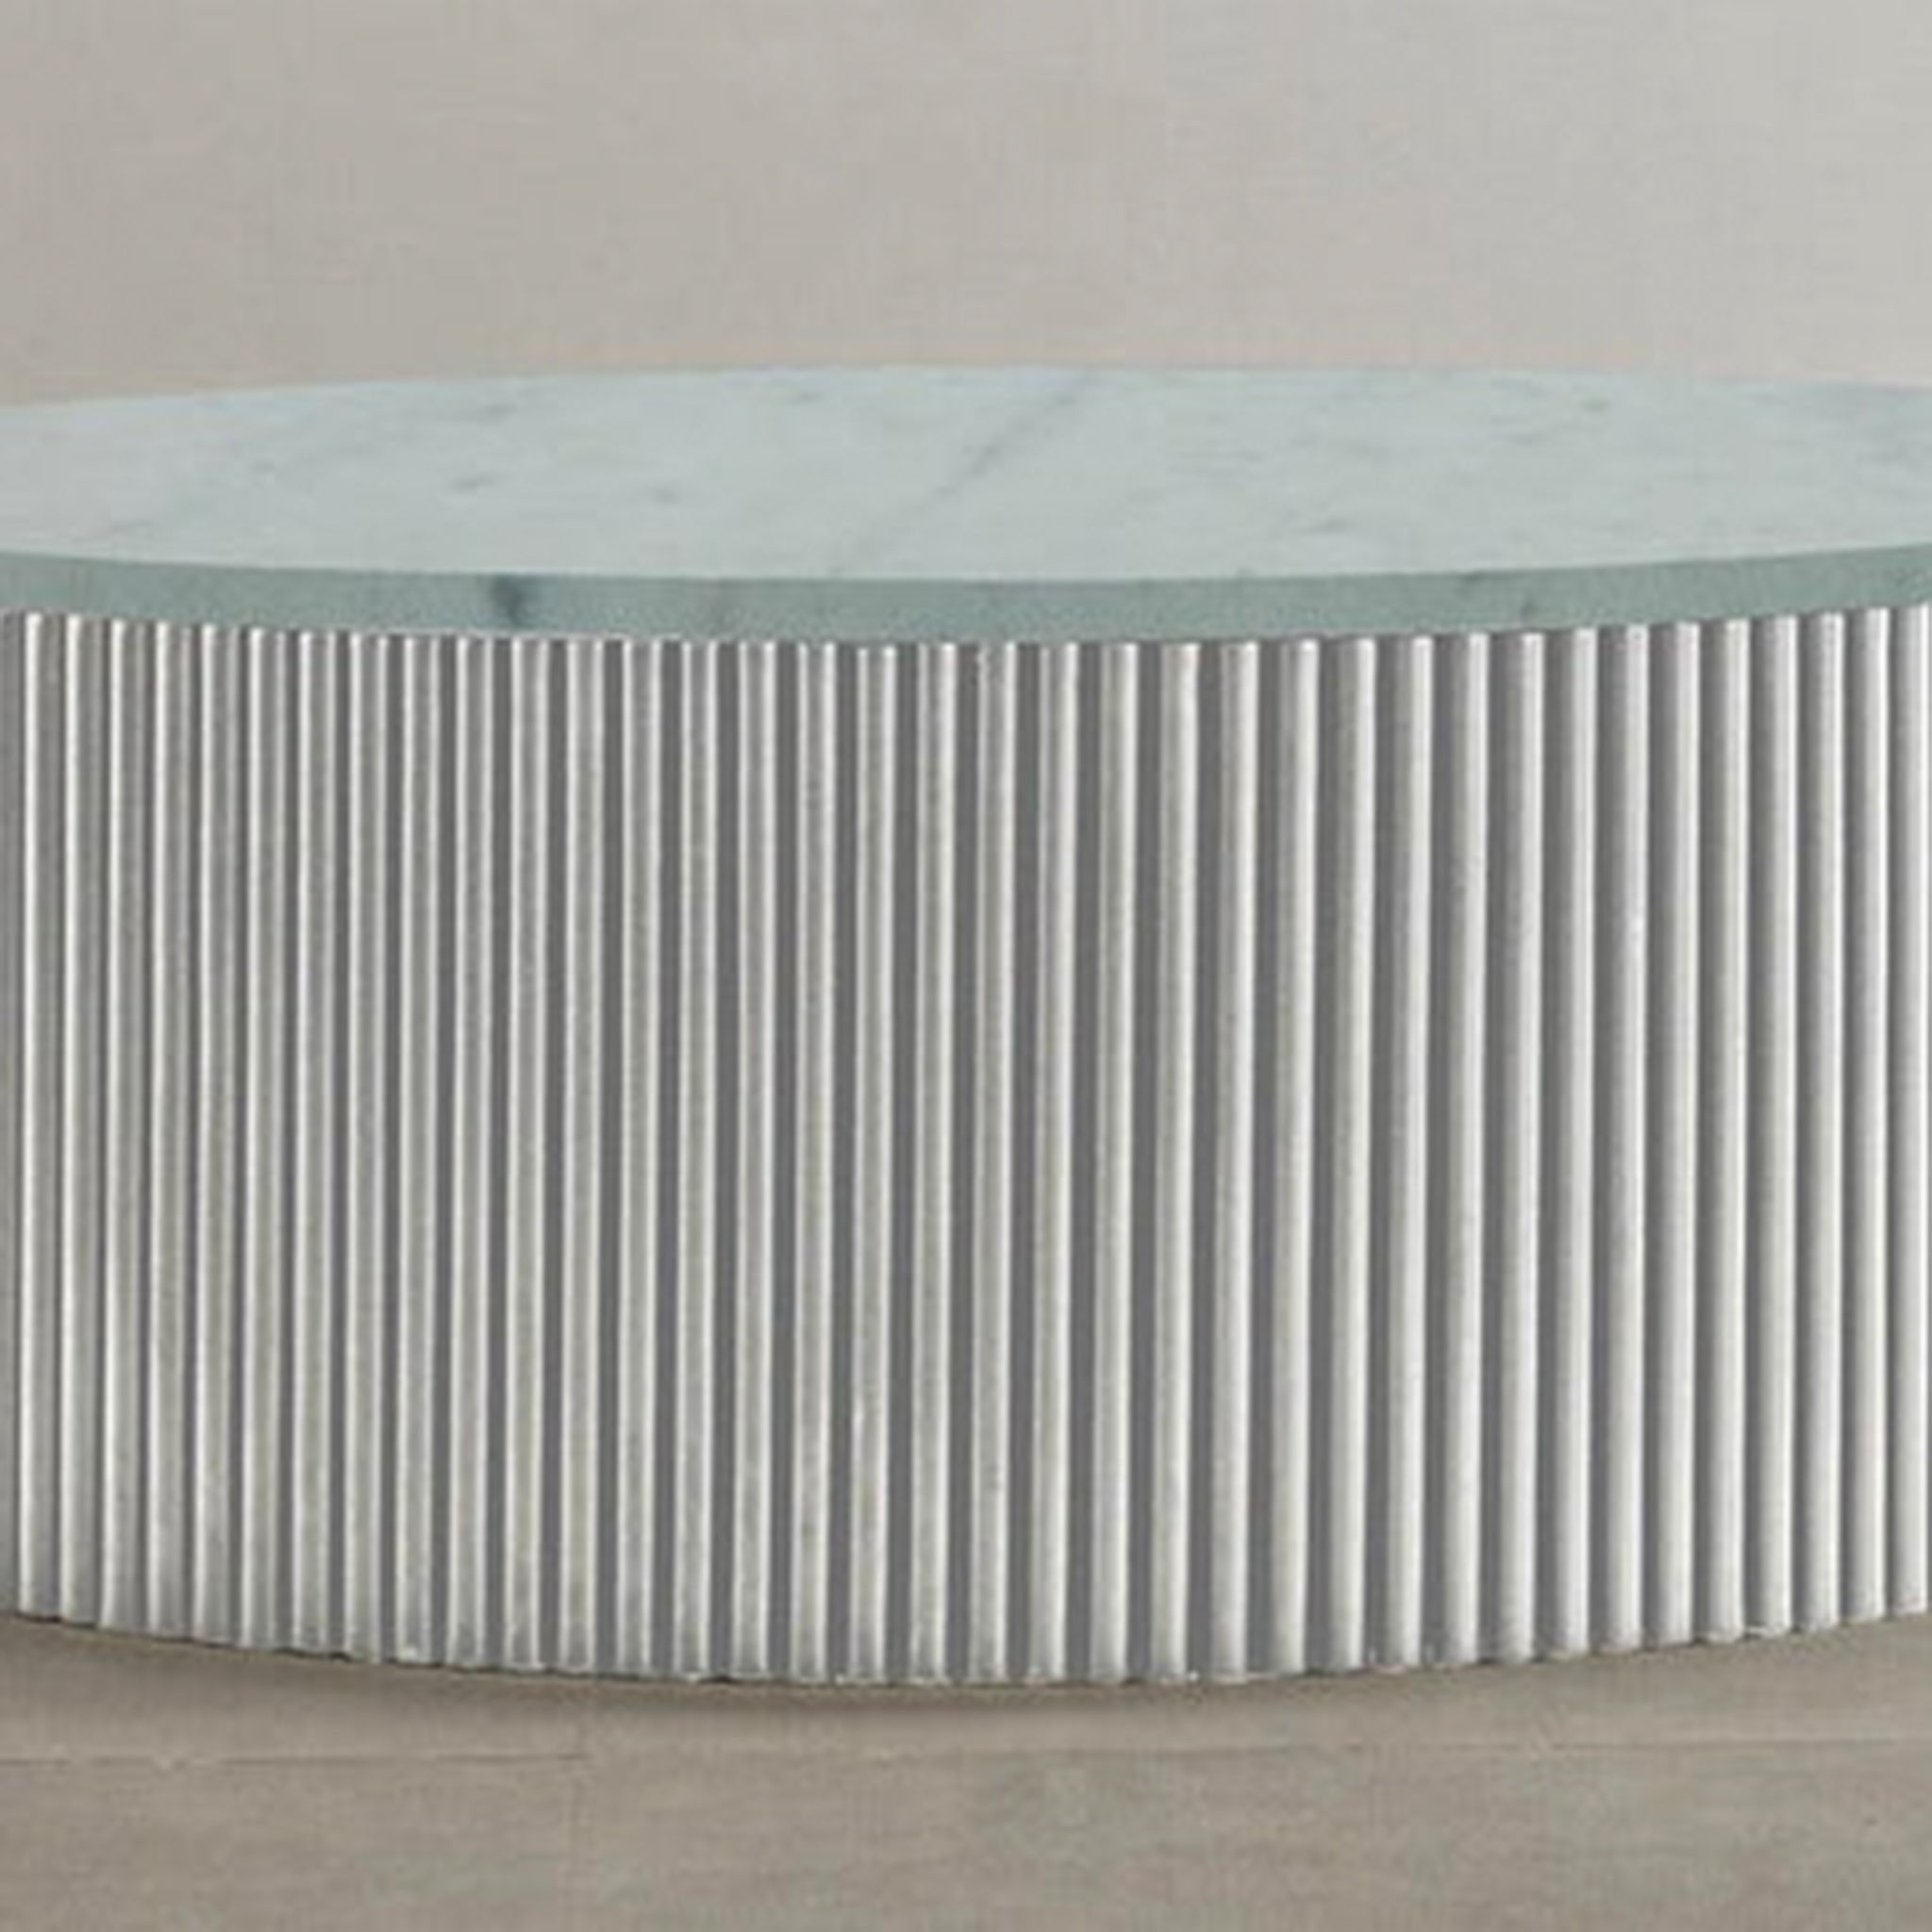 "Sophisticated coffee table with ribbed design and green surface"